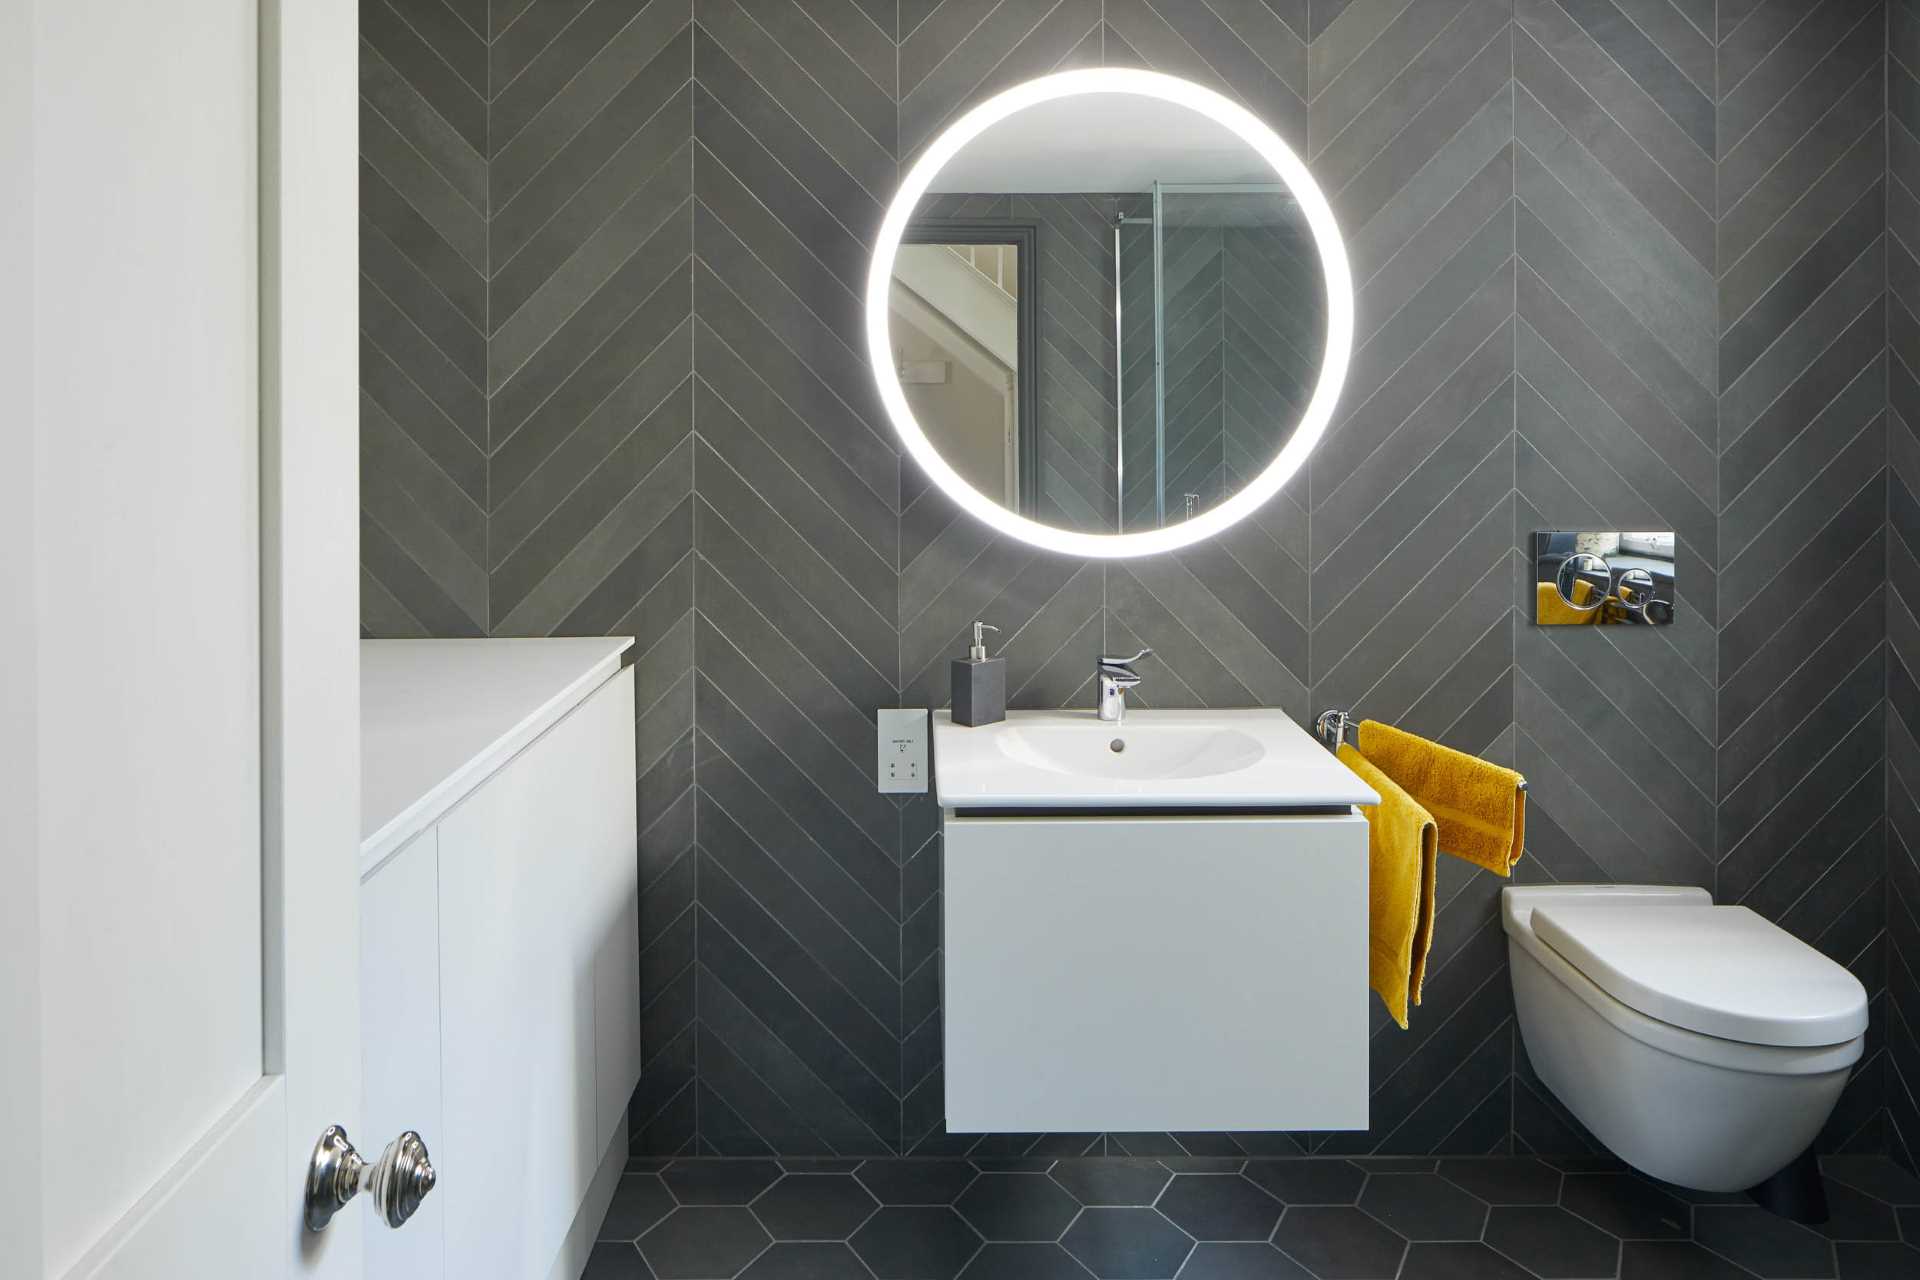 In this bathroom, the walls have been covered in grey tiles in a chevron pattern, while hexagonal tiles cover the floor.